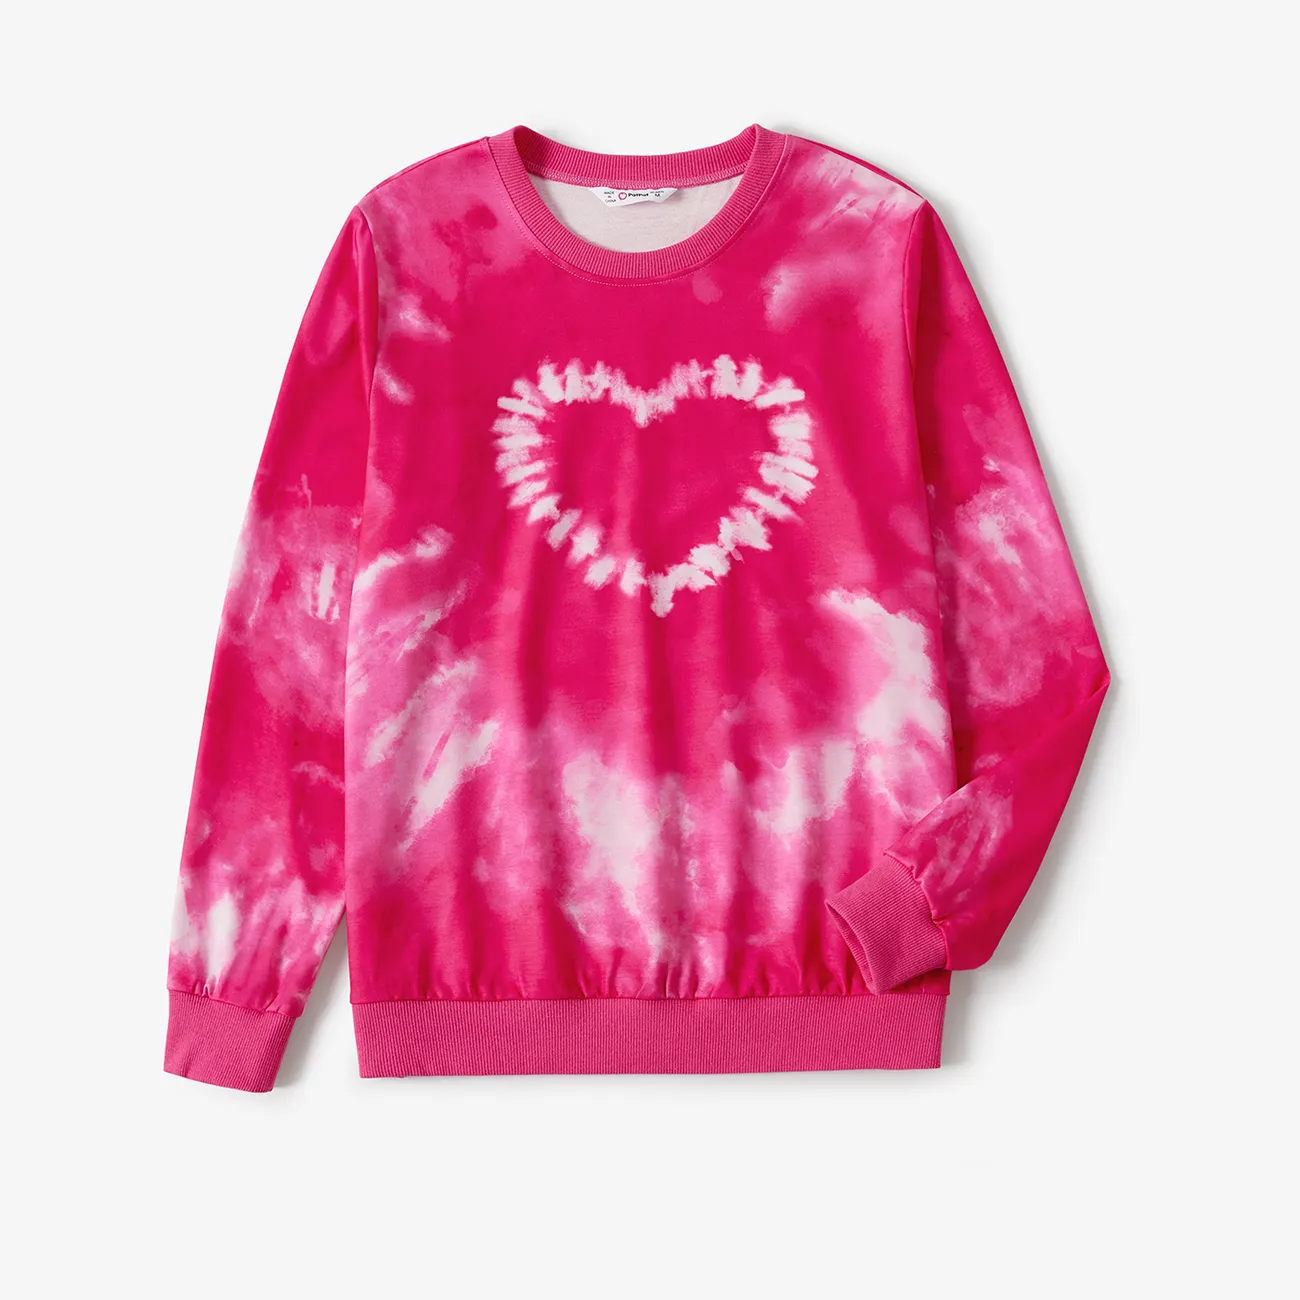 Mommy and Me Sweet Pink Tie-dye Heart Print Long-sleeve Tops Roseo big image 1